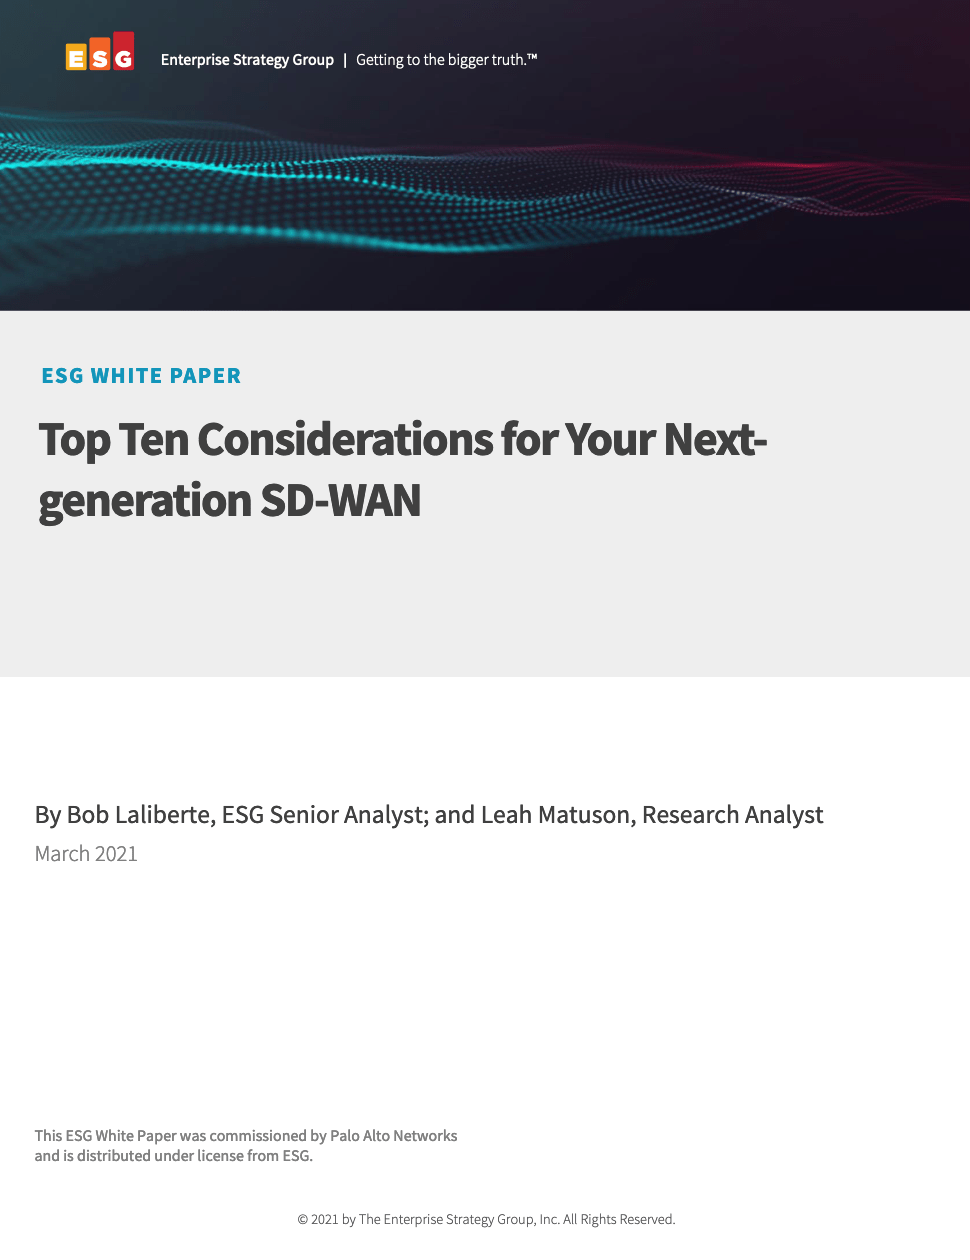 top 10 - Top Ten Considerations for Your Next-generation SD-WAN